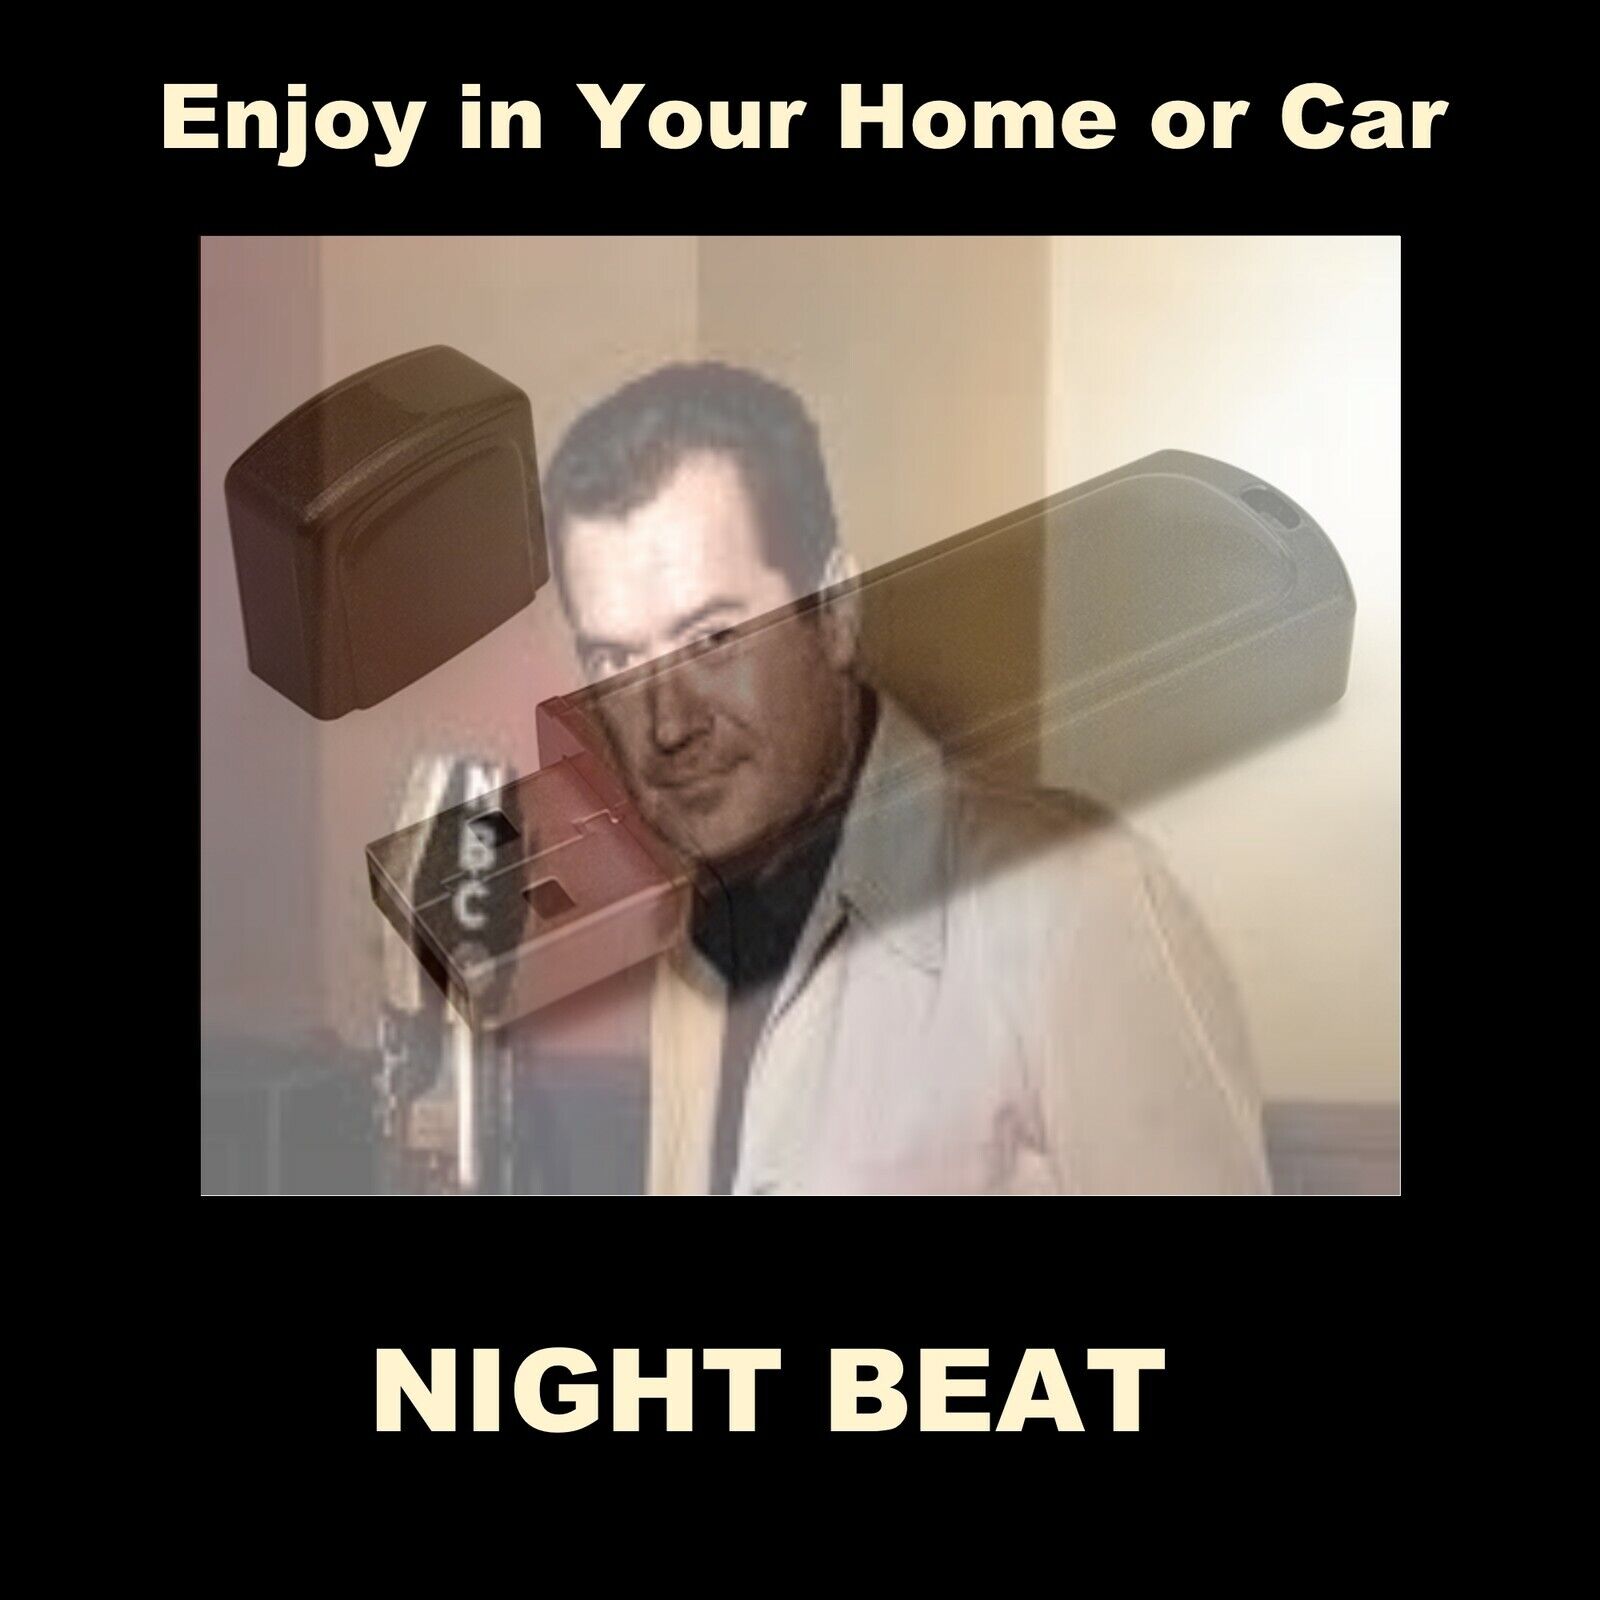 NIGHT BEAT. ENJOY 78 OLD-TIME RADIO DETECTIVE SHOWS ON A USB FLASH DRIVE